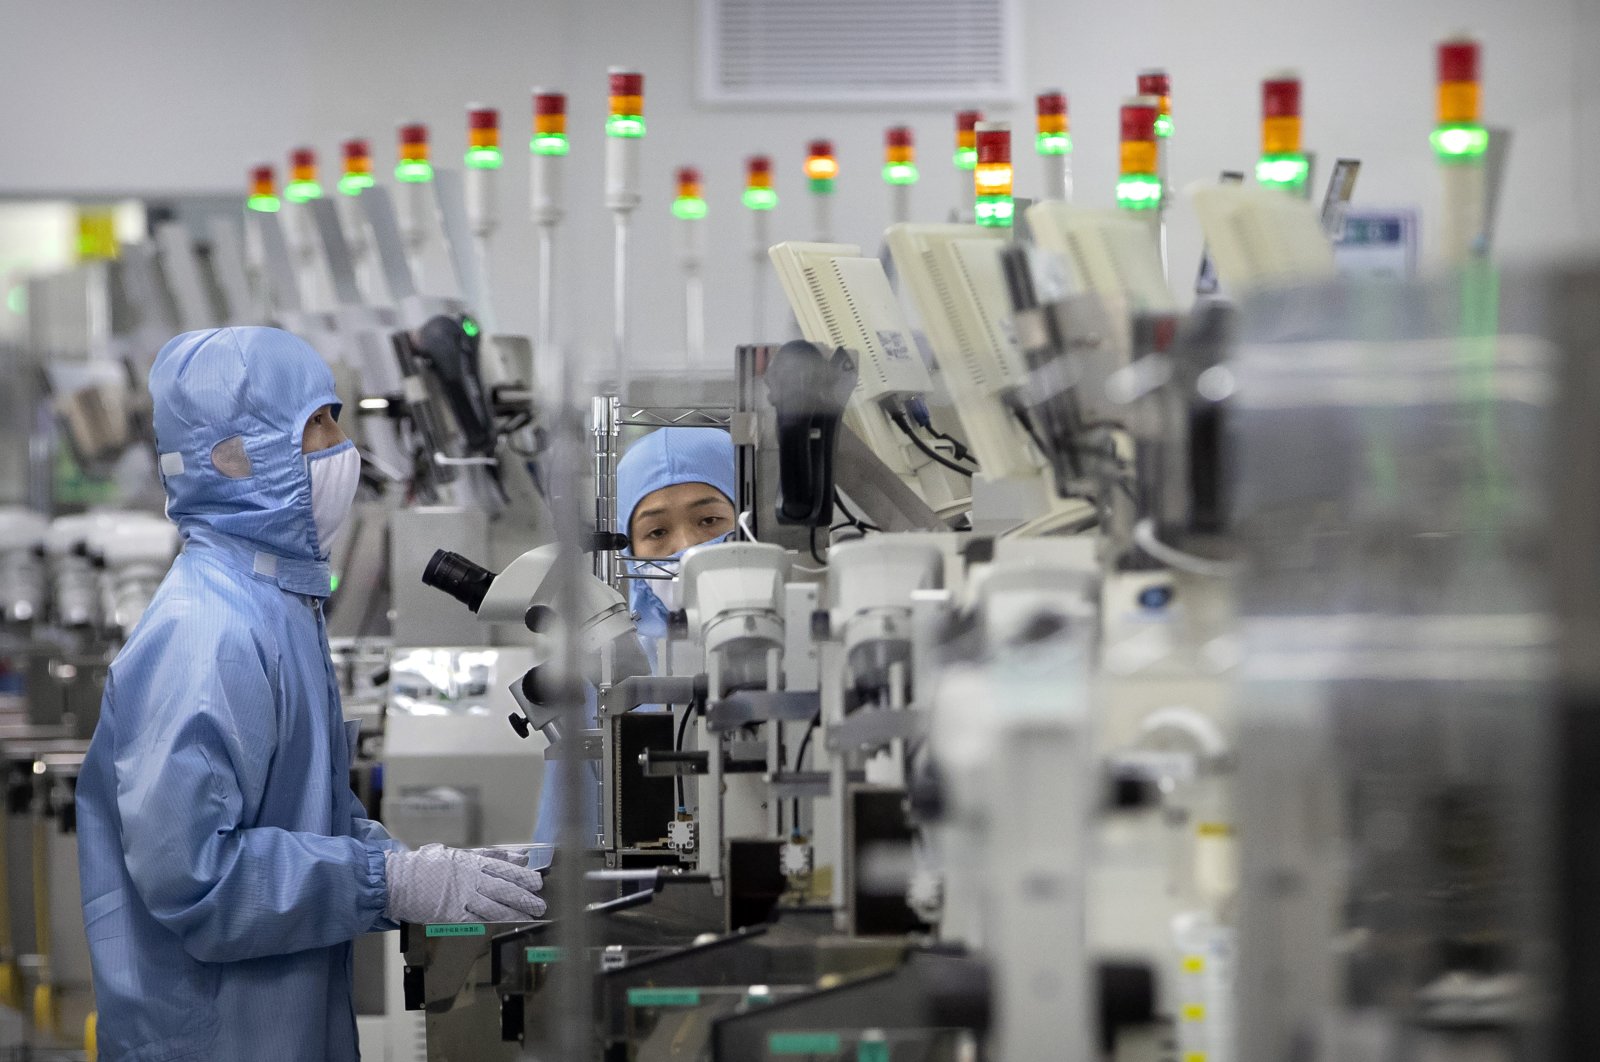 Employees wearing protective equipment work at a semiconductor production facility for Renesas Electronics seen during a government-organized tour for journalists, Beijing, China, May 14, 2020. (AP Photo)